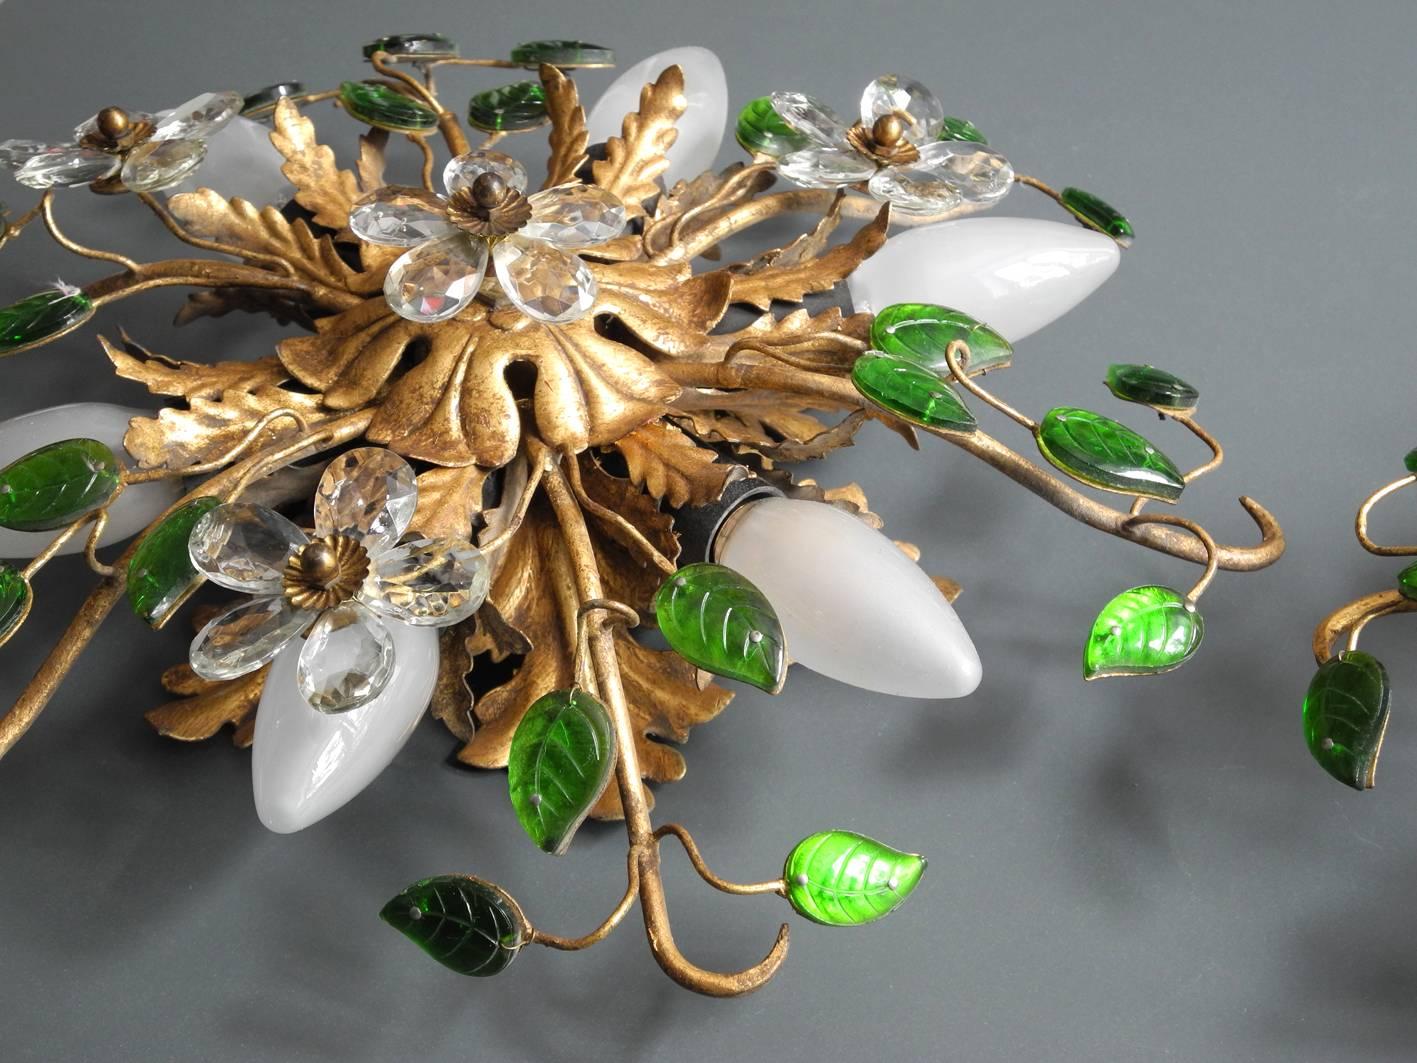 Pair of elegant very rare 1970s Christoph Palme Florentine ceiling or wall lamps.
Very elegant design with transparent and green flowers and leaves made of glass and brass frame.
Fully functional with six E14 sockets each. Suitable for all living